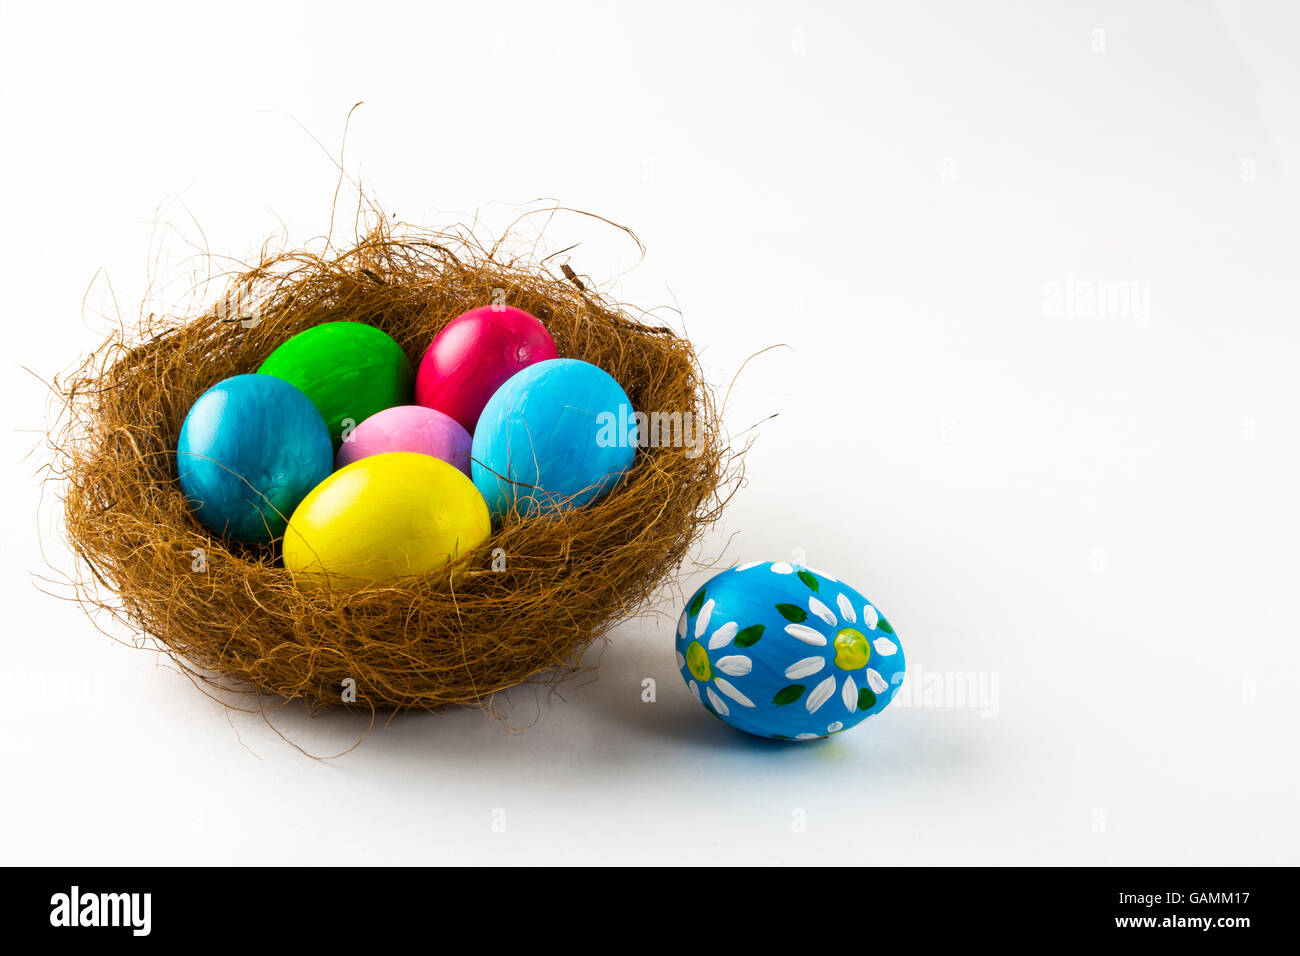 Multicolored Easter eggs in a nest and blue Easter egg with floral design on white background. Easter background. Easter symbol. Stock Photo